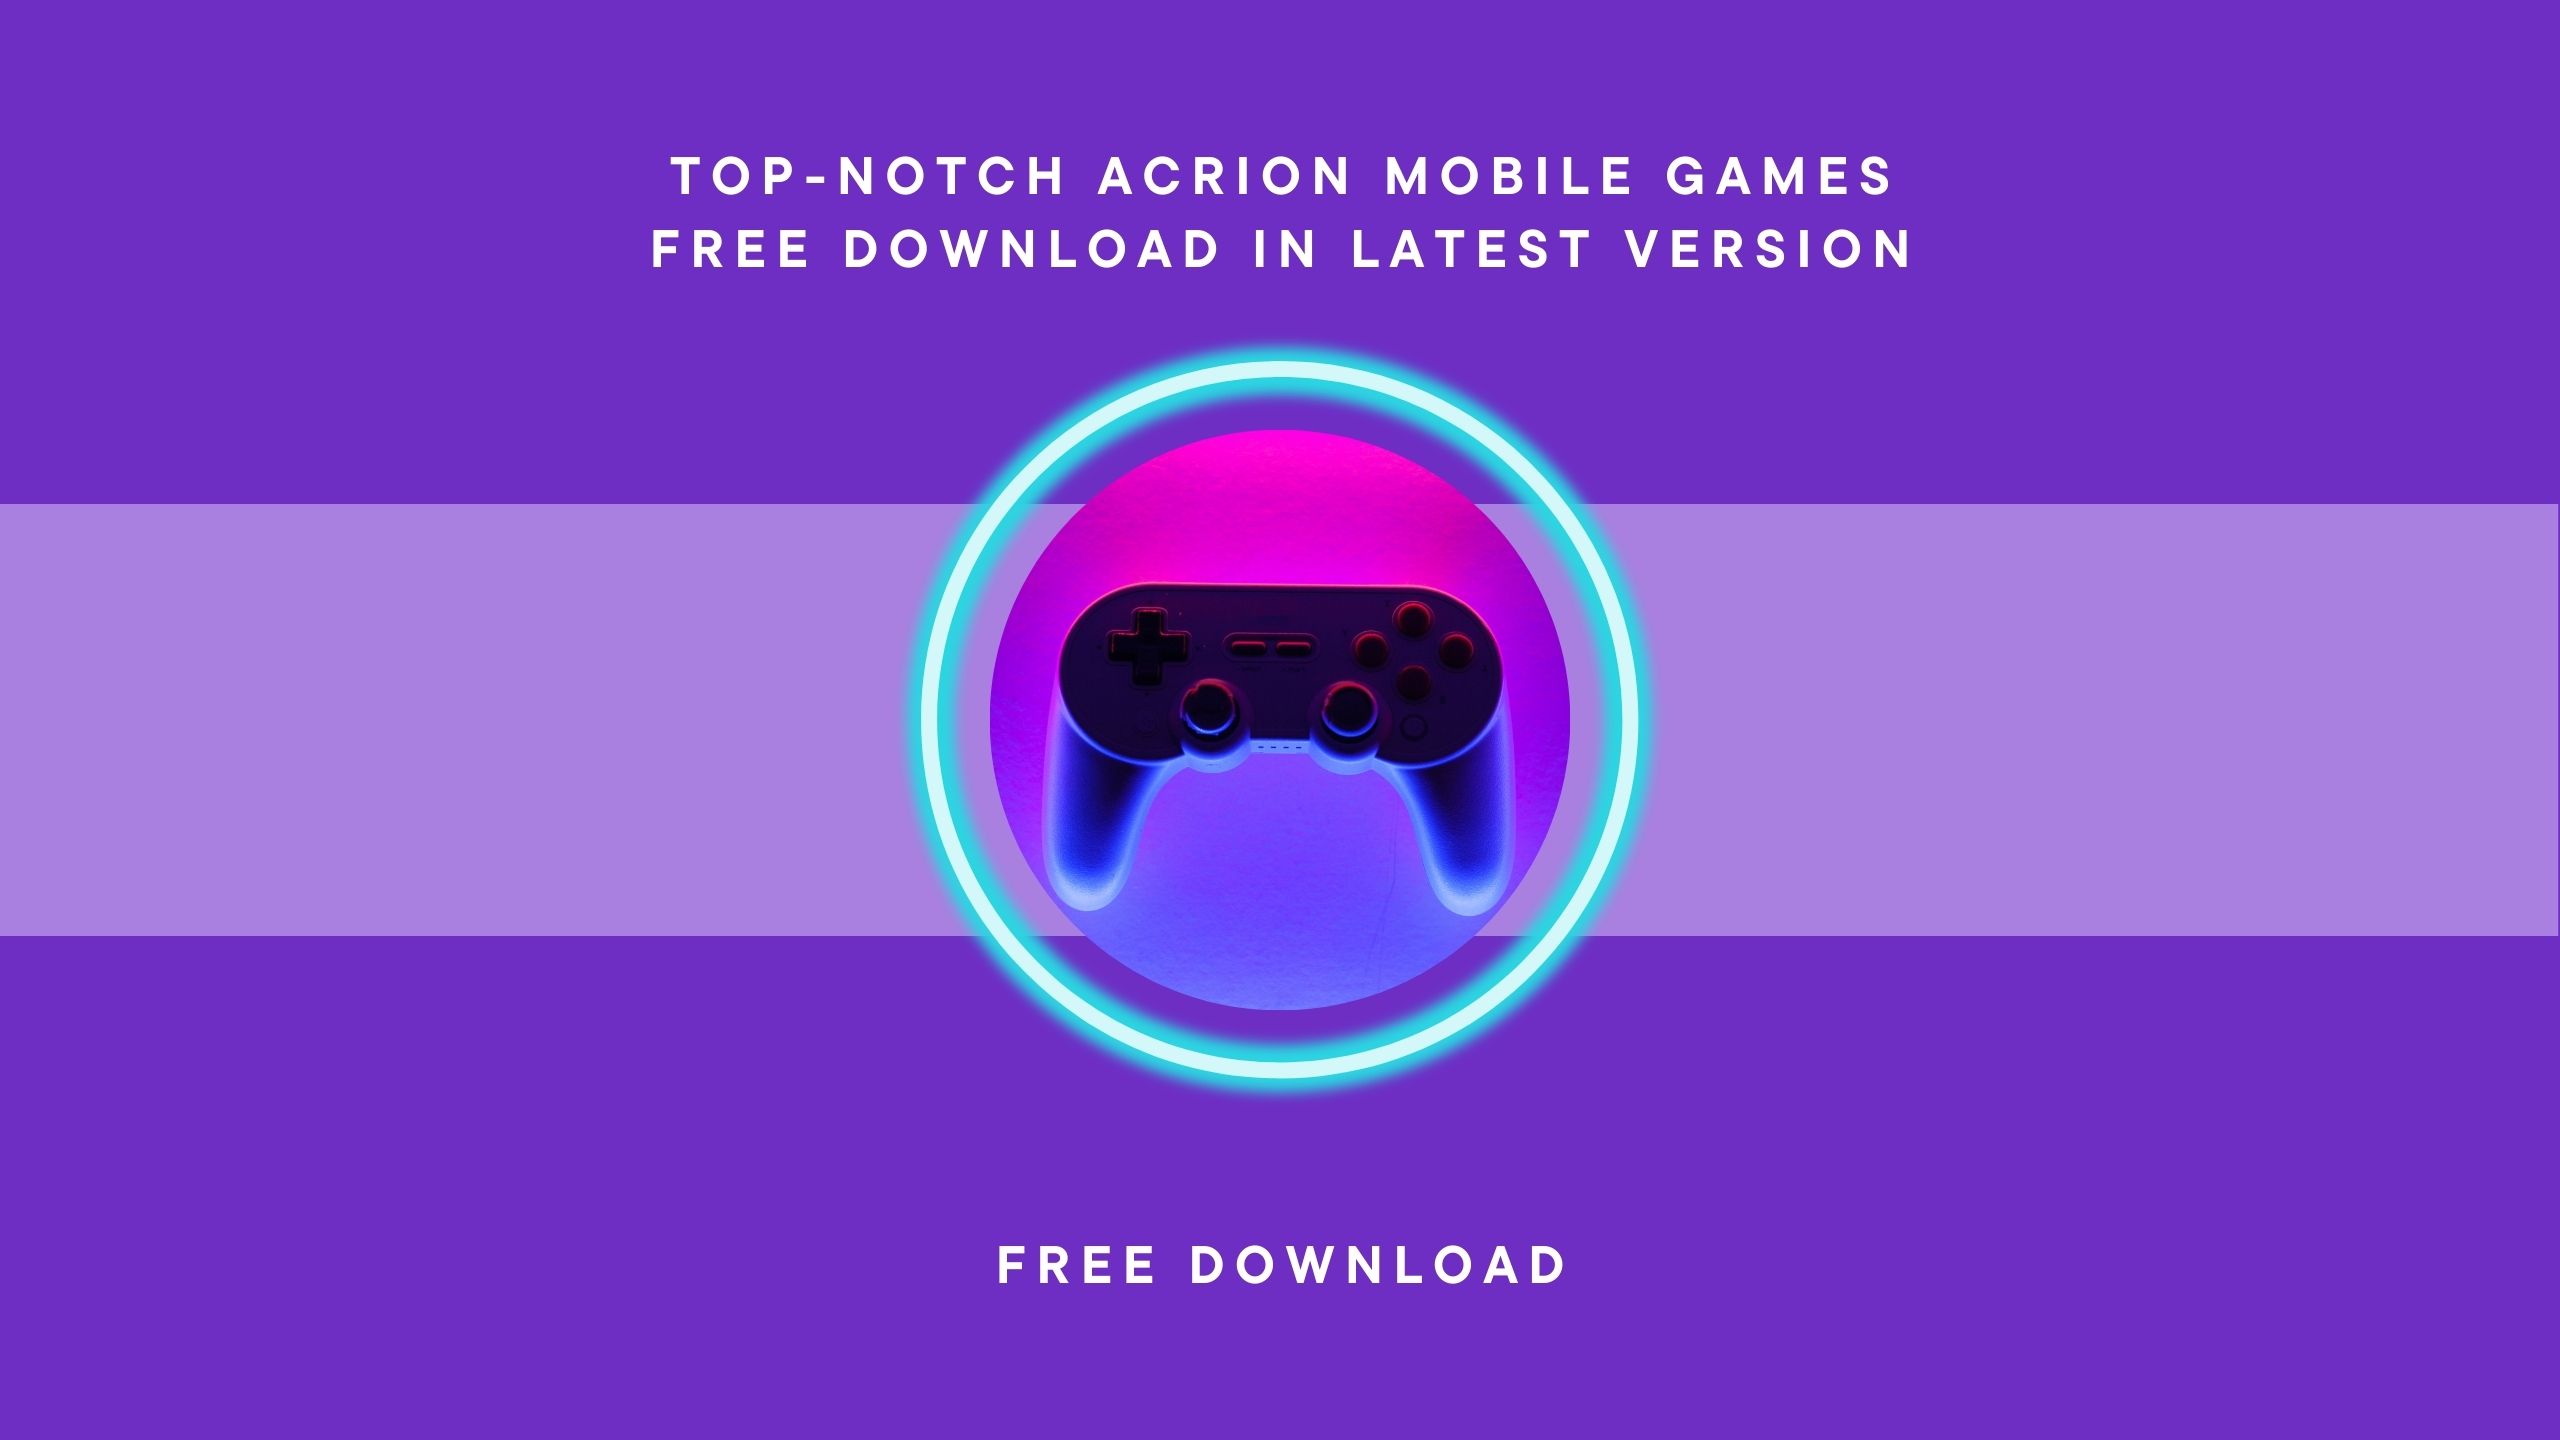 Action Mobile Games